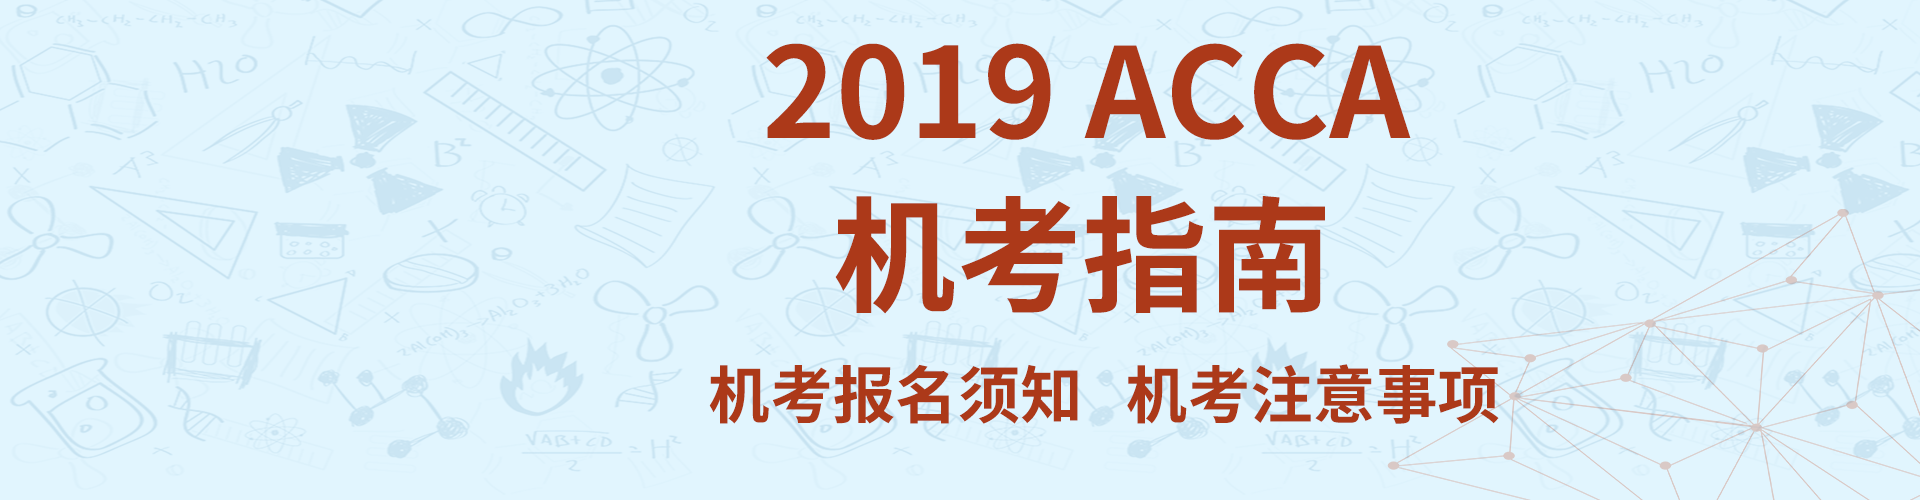 2019ACCA机考指南